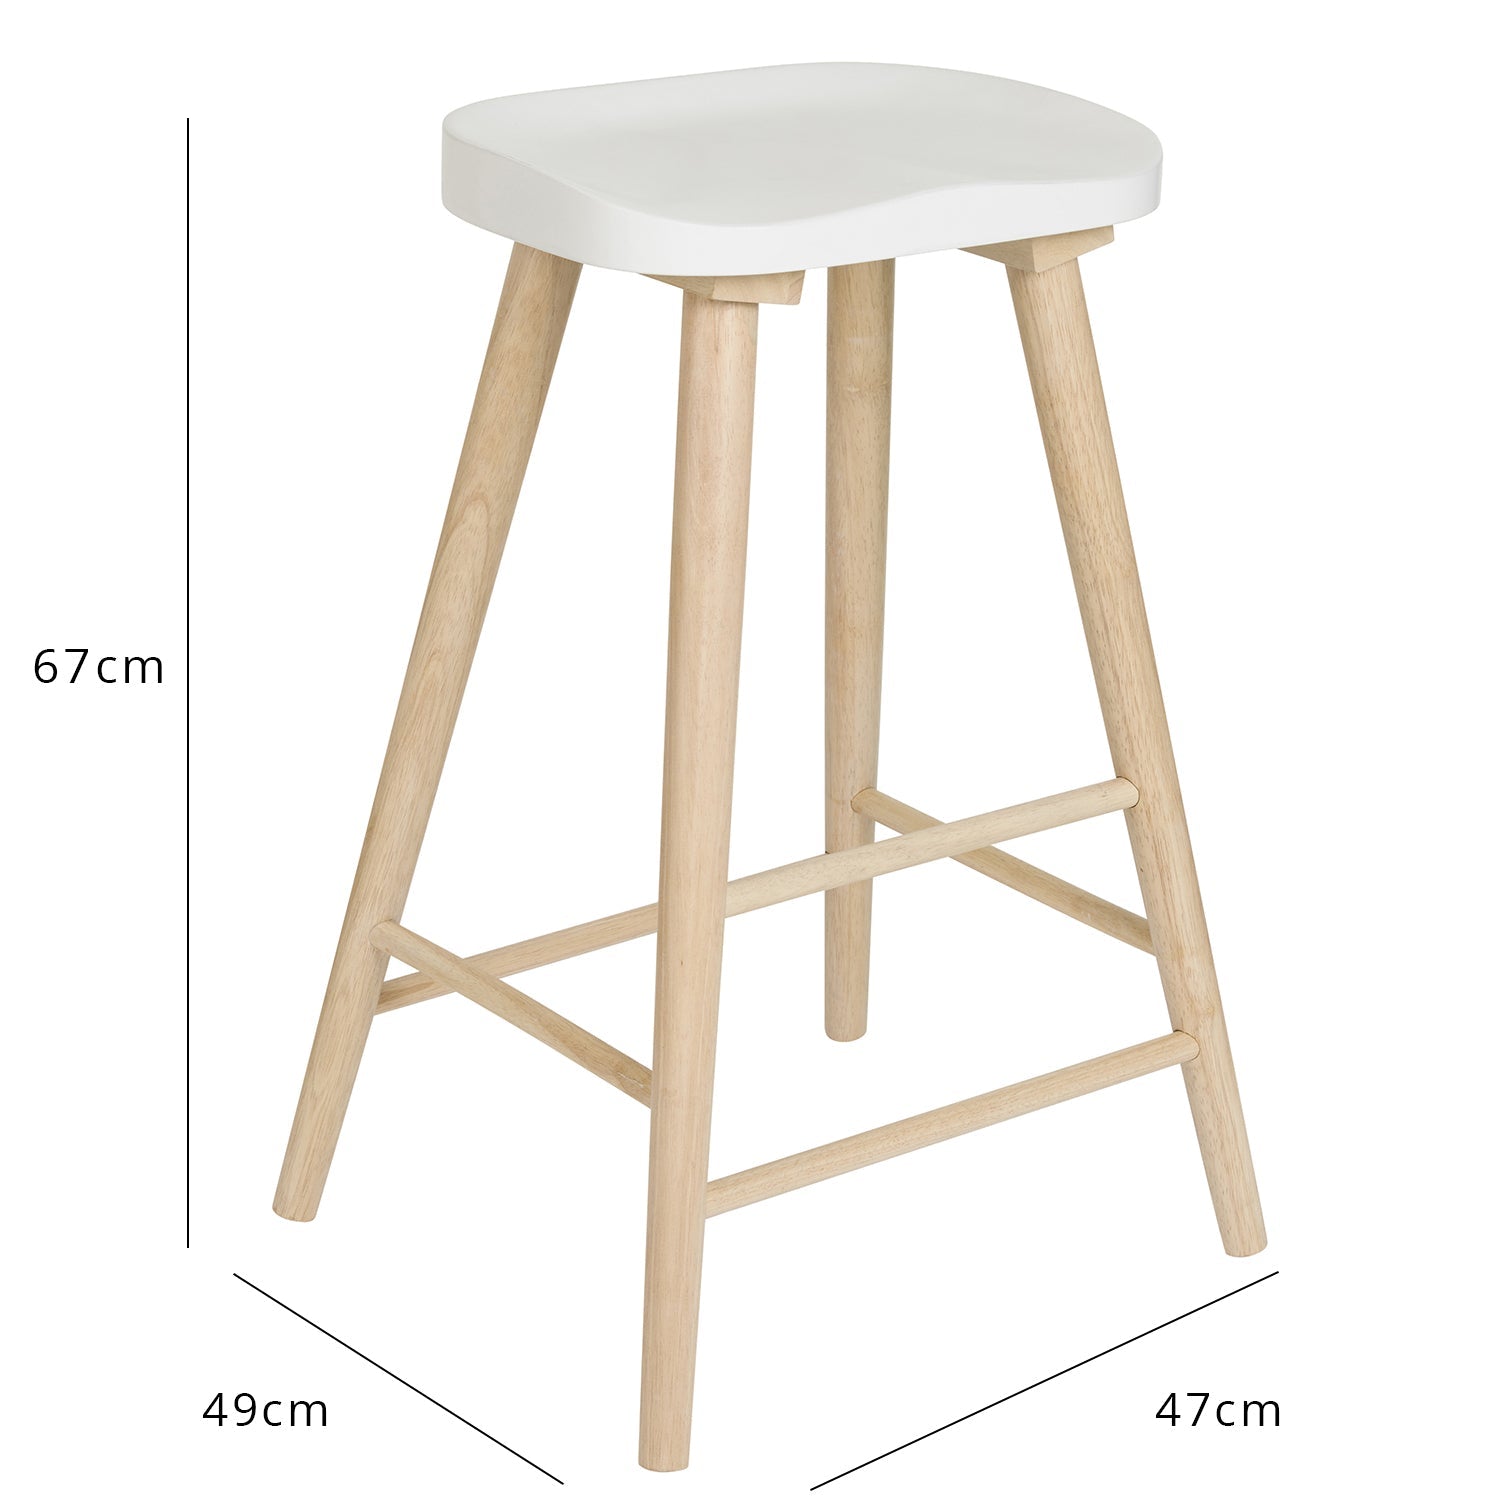 Silvester bar stool - whitewash frame with white top - Laura James